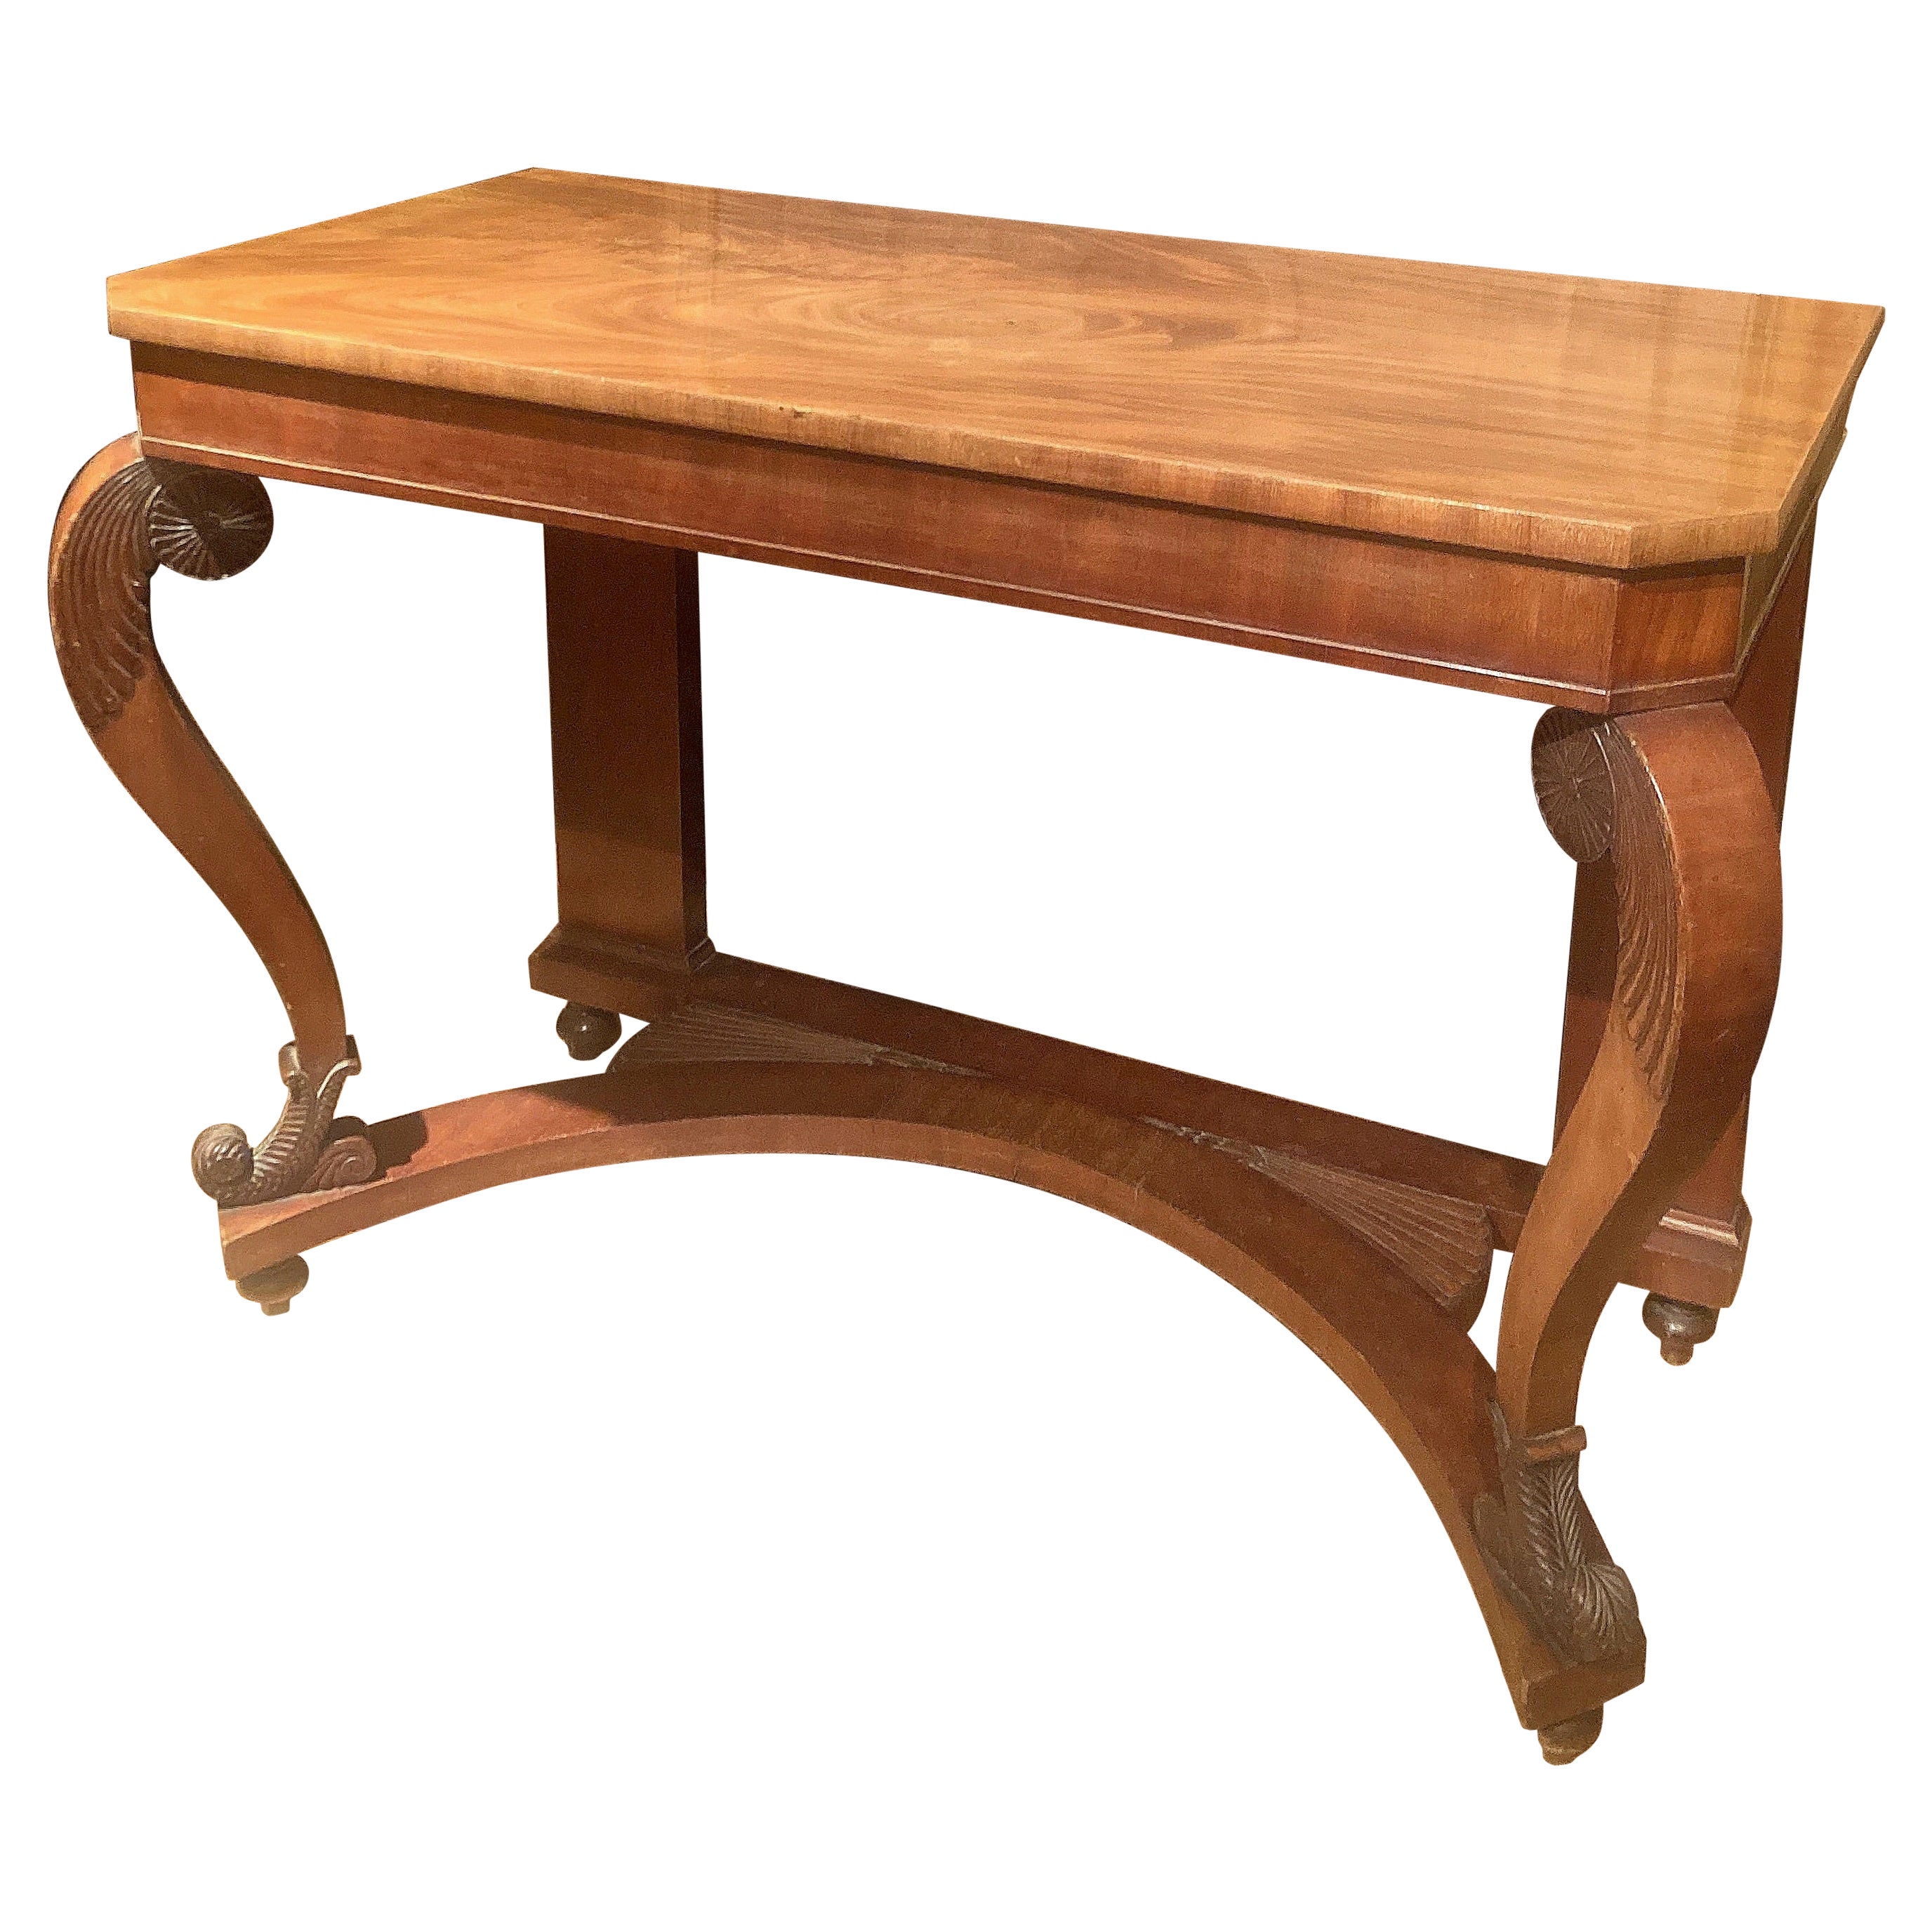 Italian Early 20th Century Art Nouveau Wood Console Table or Writing Desk For Sale